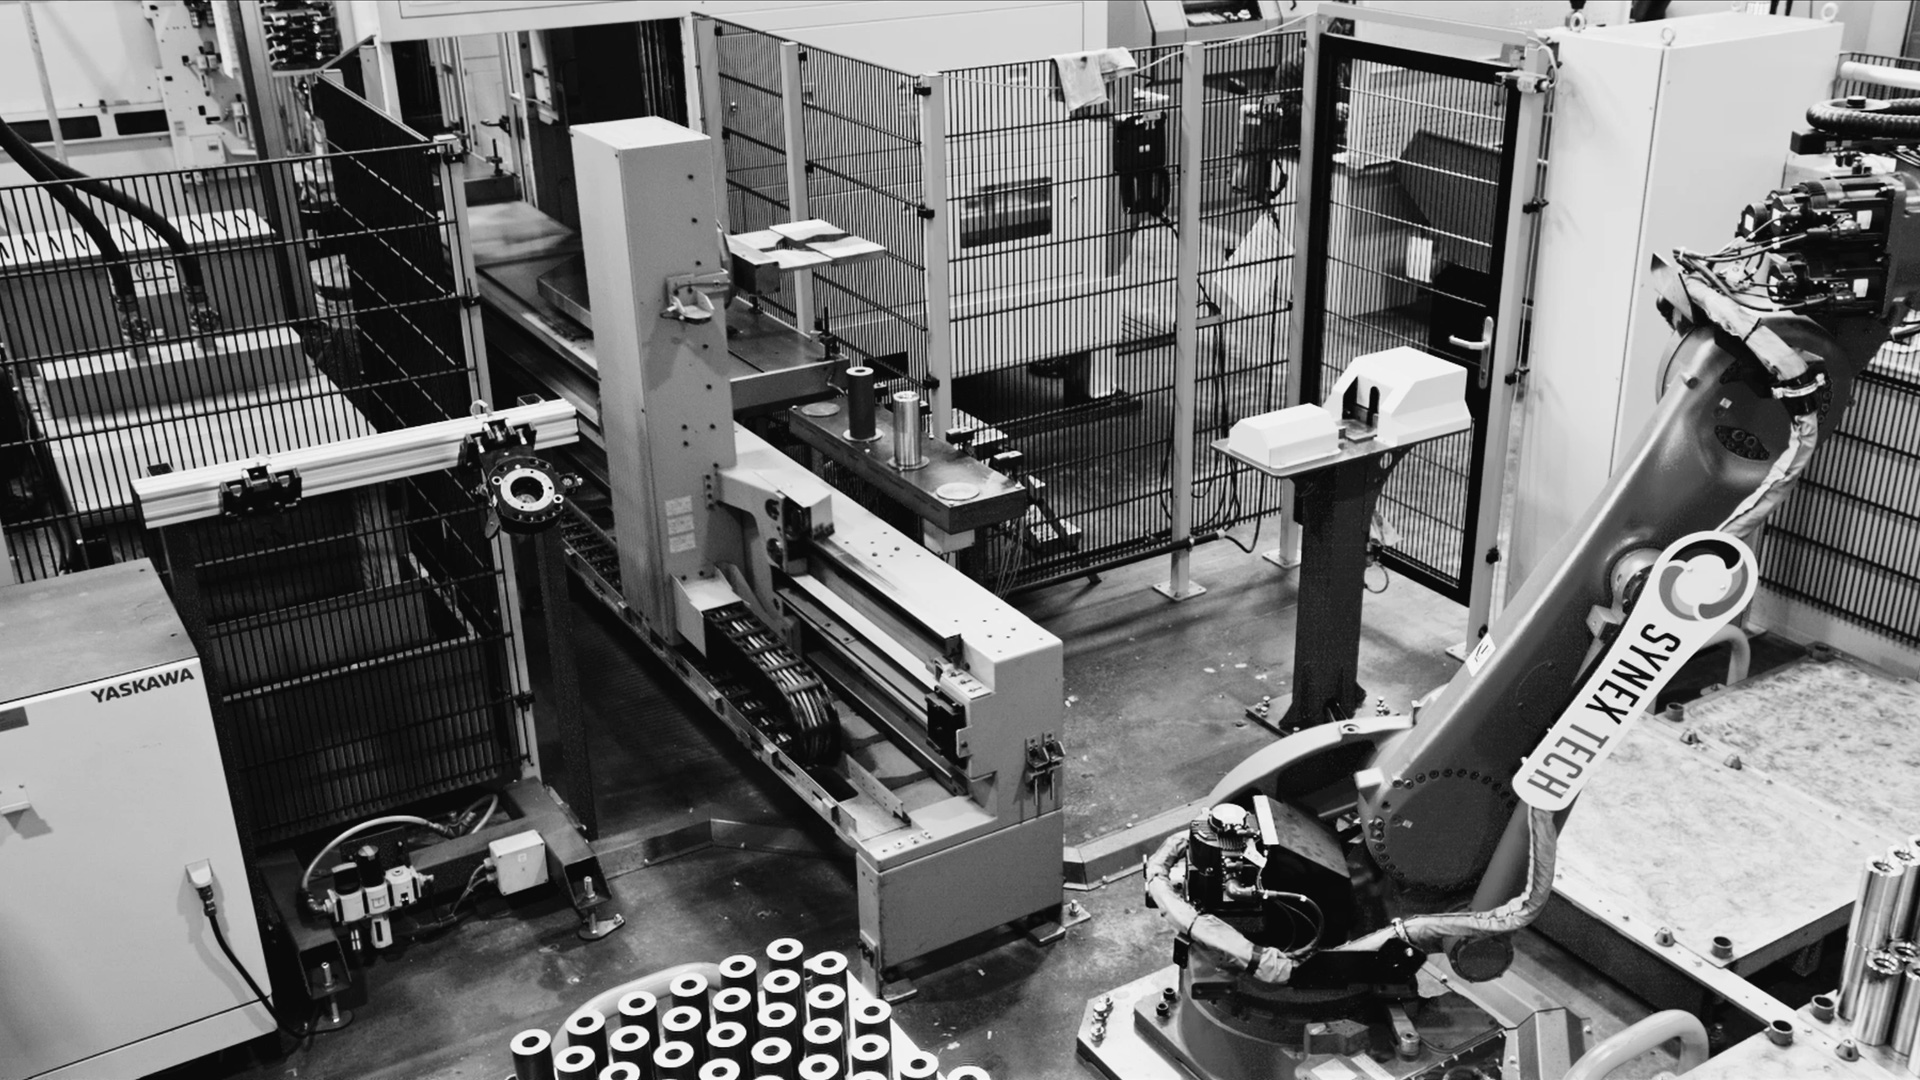 Machines in a production hall